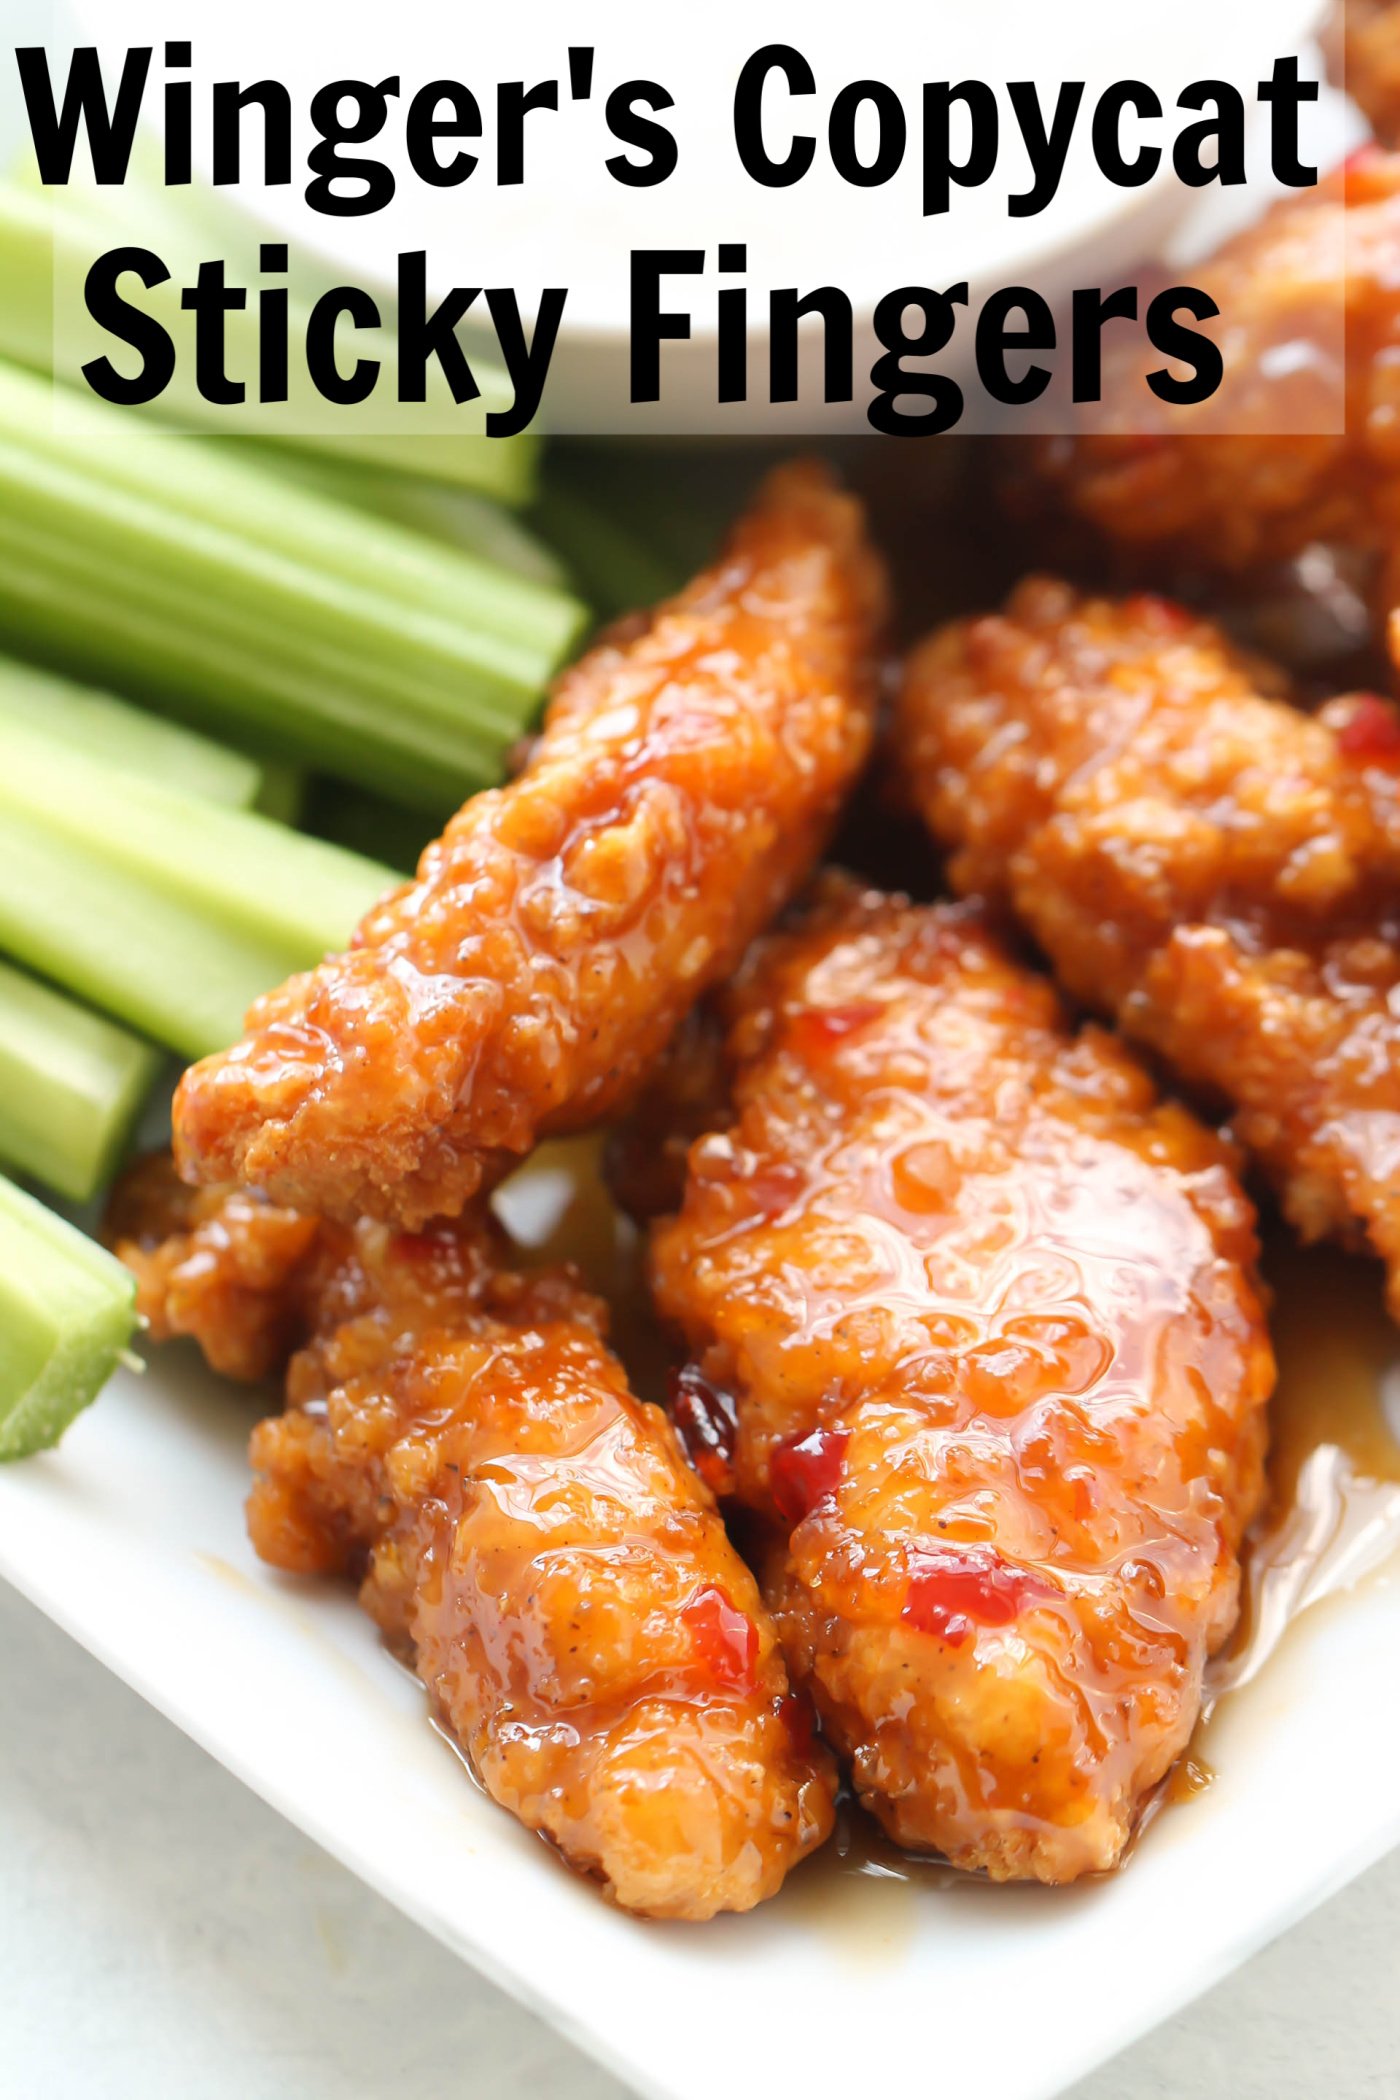 Winger’s Sticky Fingers on a plate with celery sticks